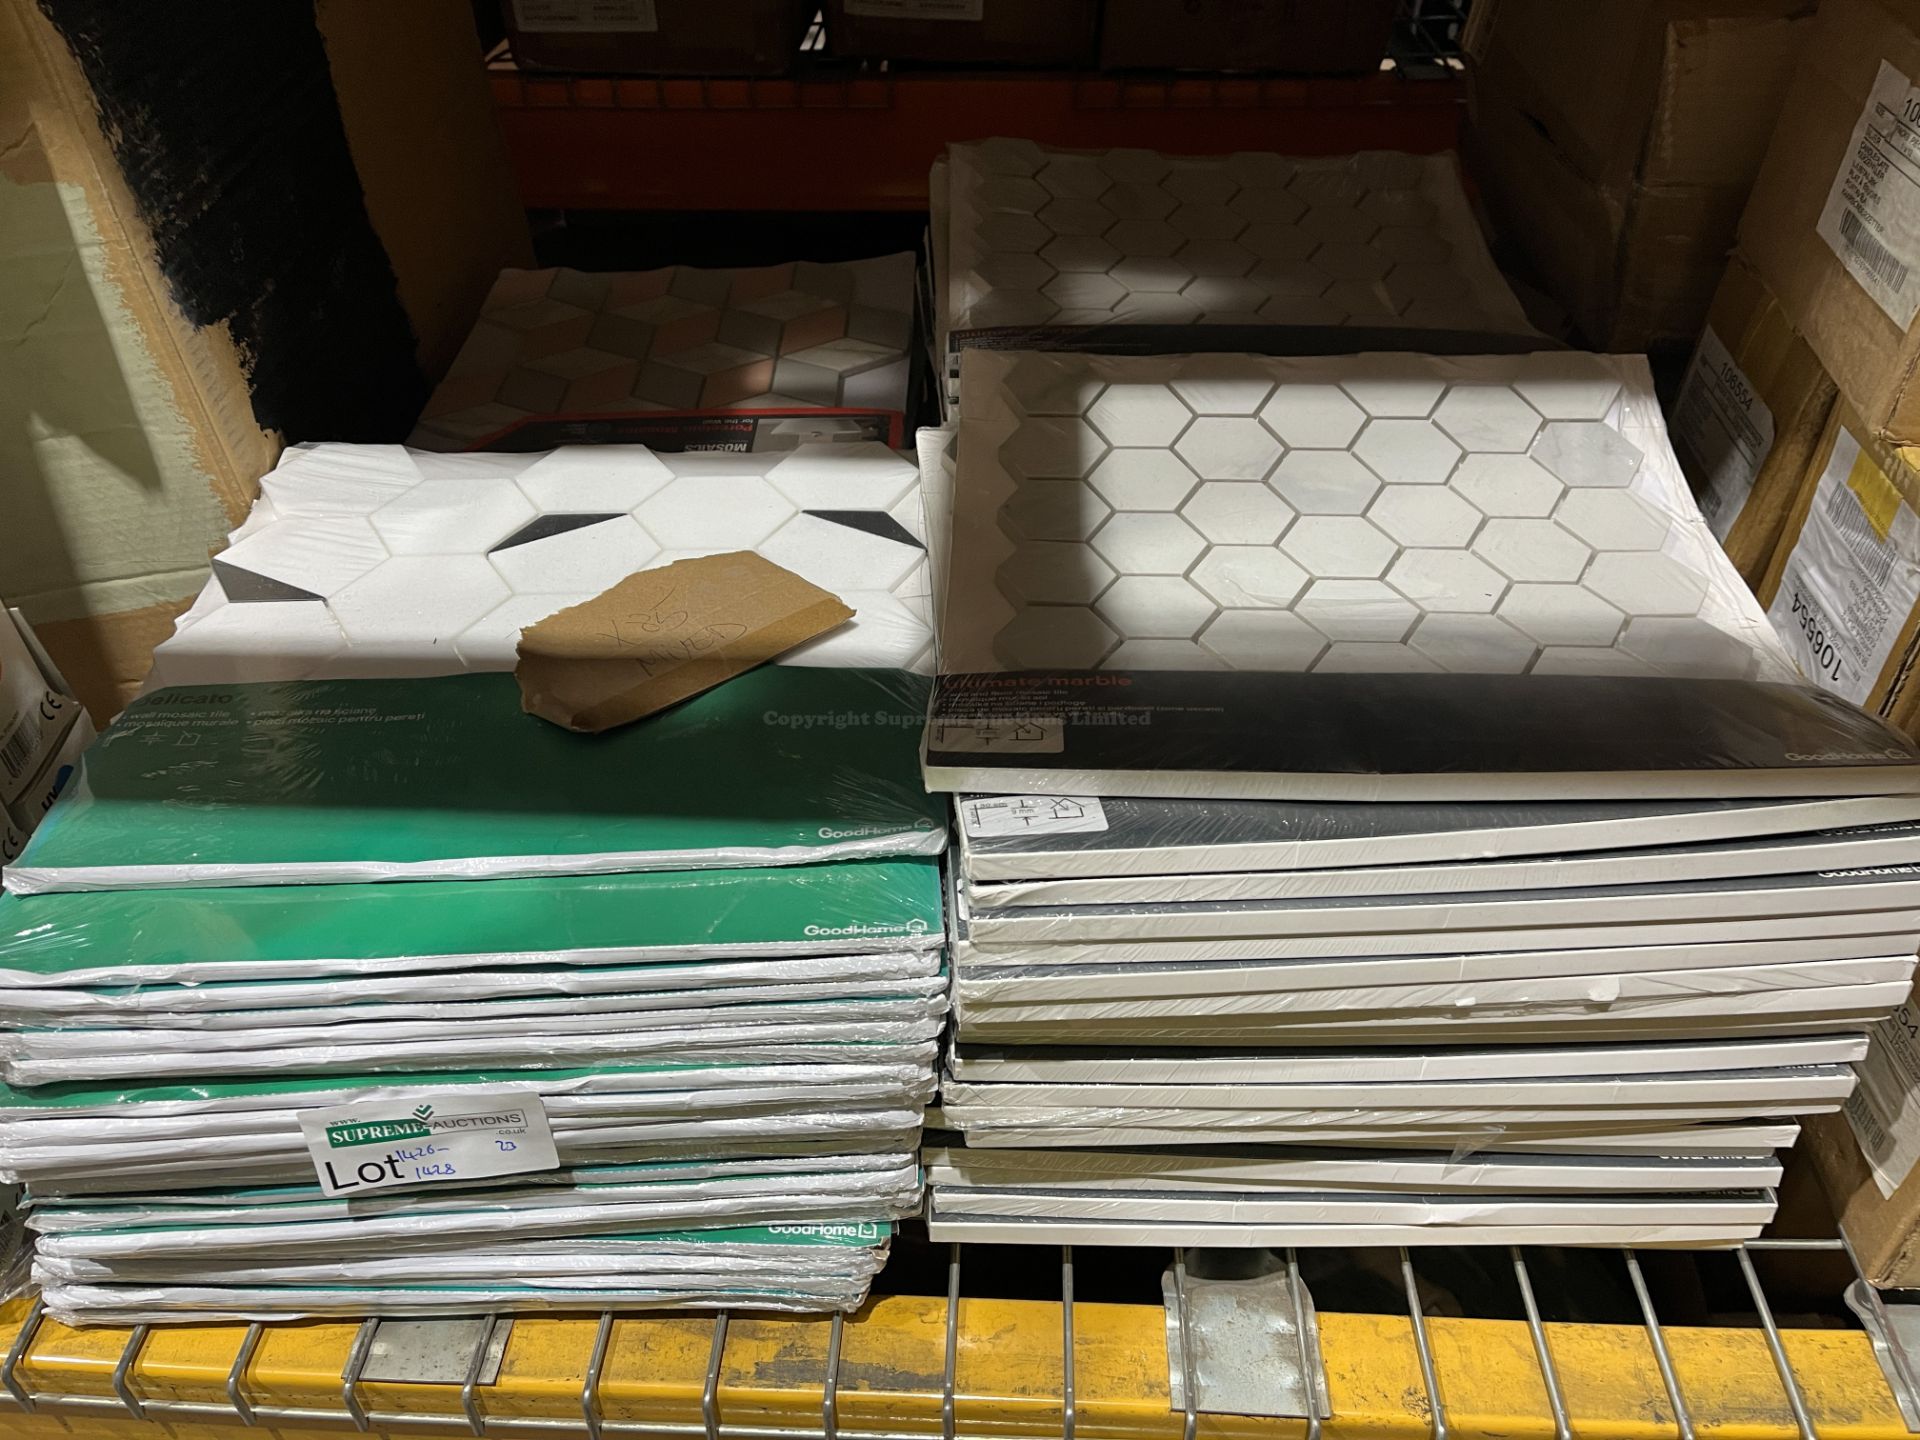 25 X BRAND NEW MOSAIC TILE SHEETS IN VARIOUS DESIGNS R9-10